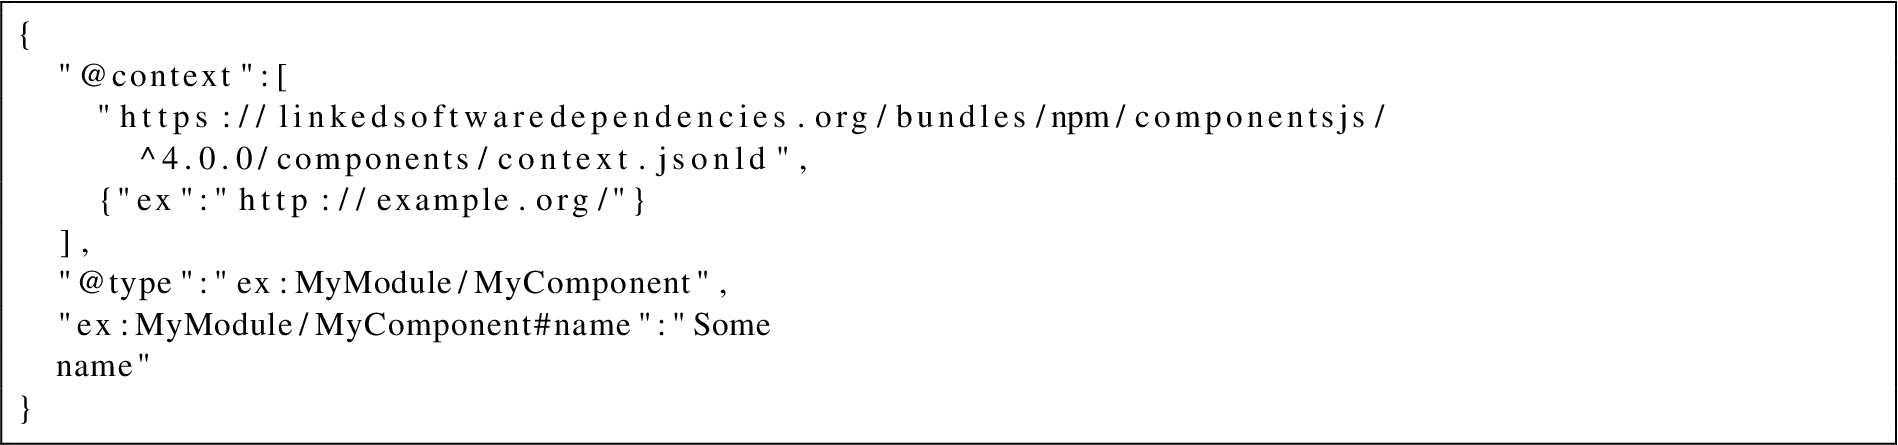 Instantiation of ex:MyModule/MyComponent using a value for the parameter ex:MyModule/MyComponent#name.